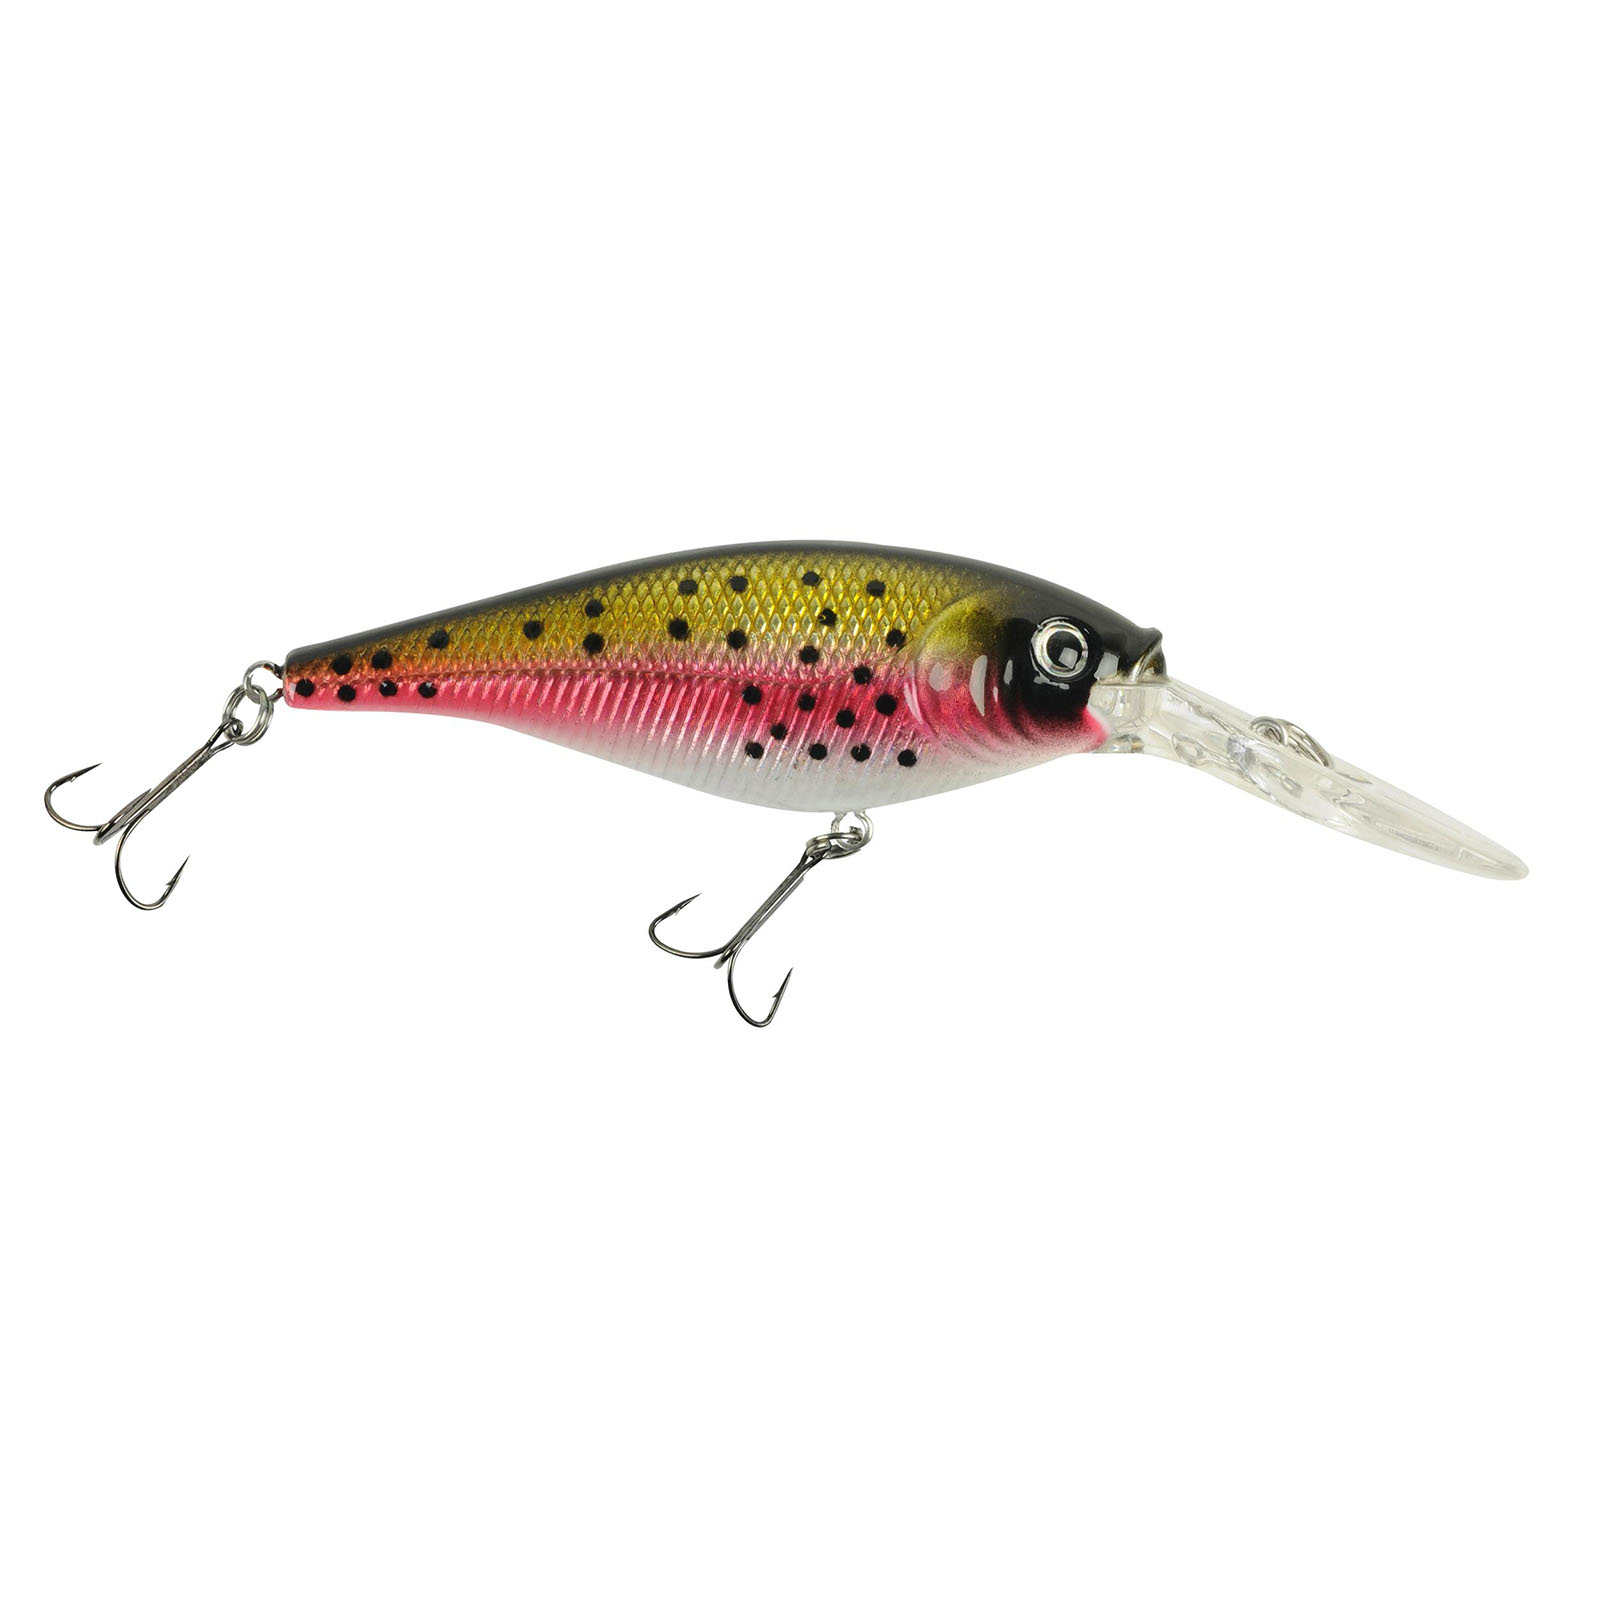 Flicker Shad 7 Shallow Chartreuse Pearl 3-6' - Zone Chasse et Pêche /  Ecotone Val-d'Or